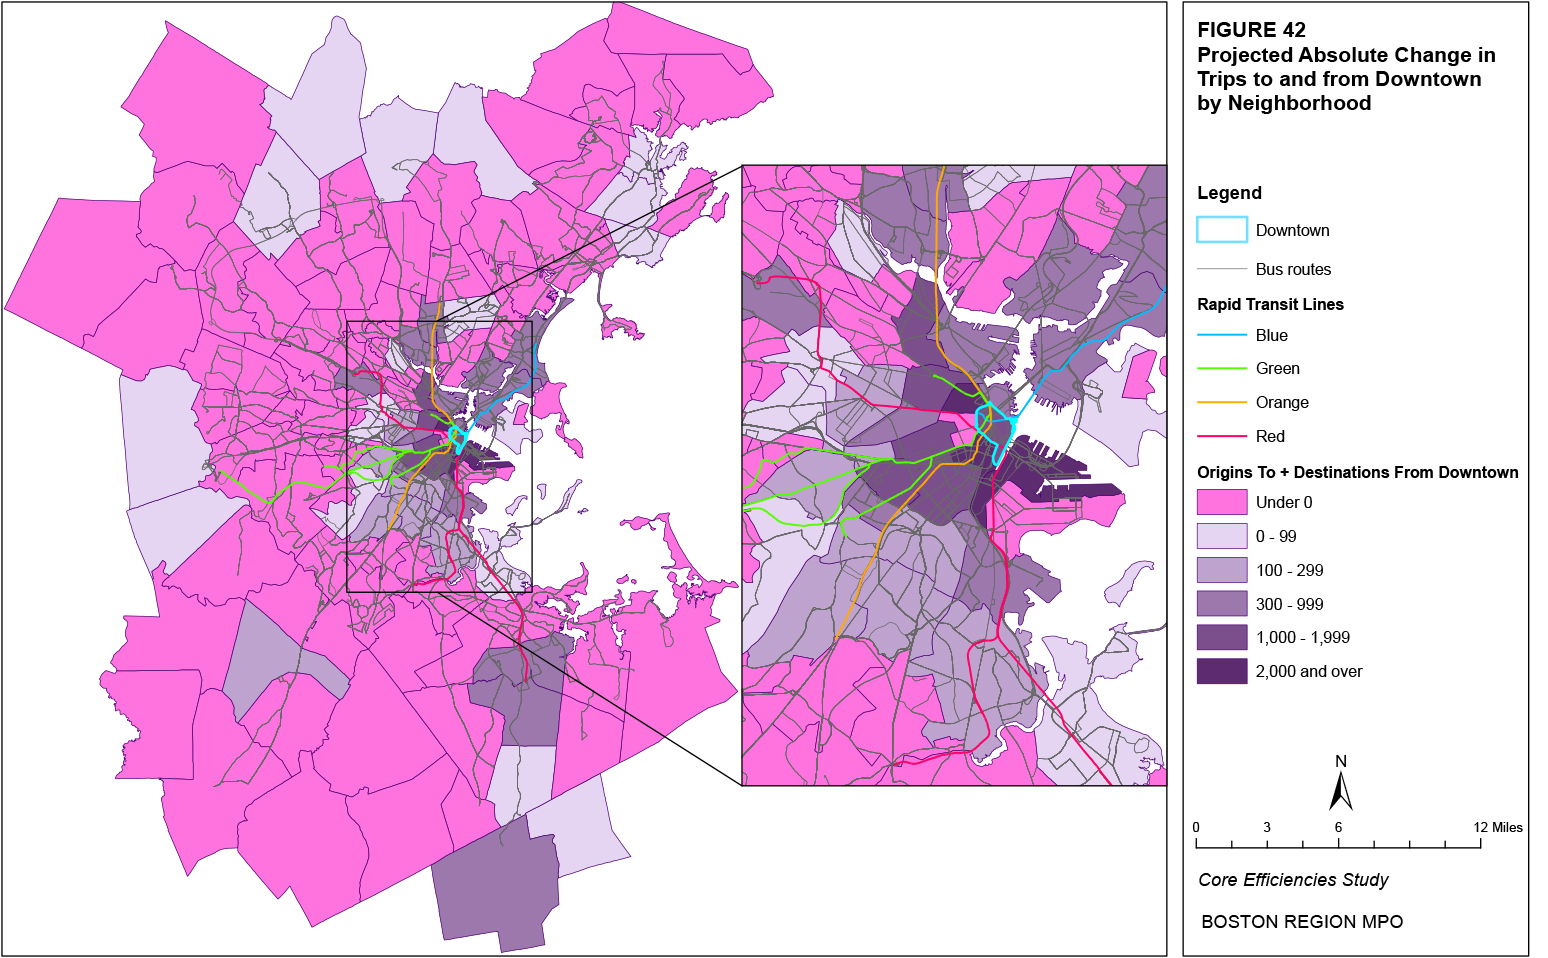 This map shows the projected absolute change in trips to and from the Downtown neighborhood by neighborhood.